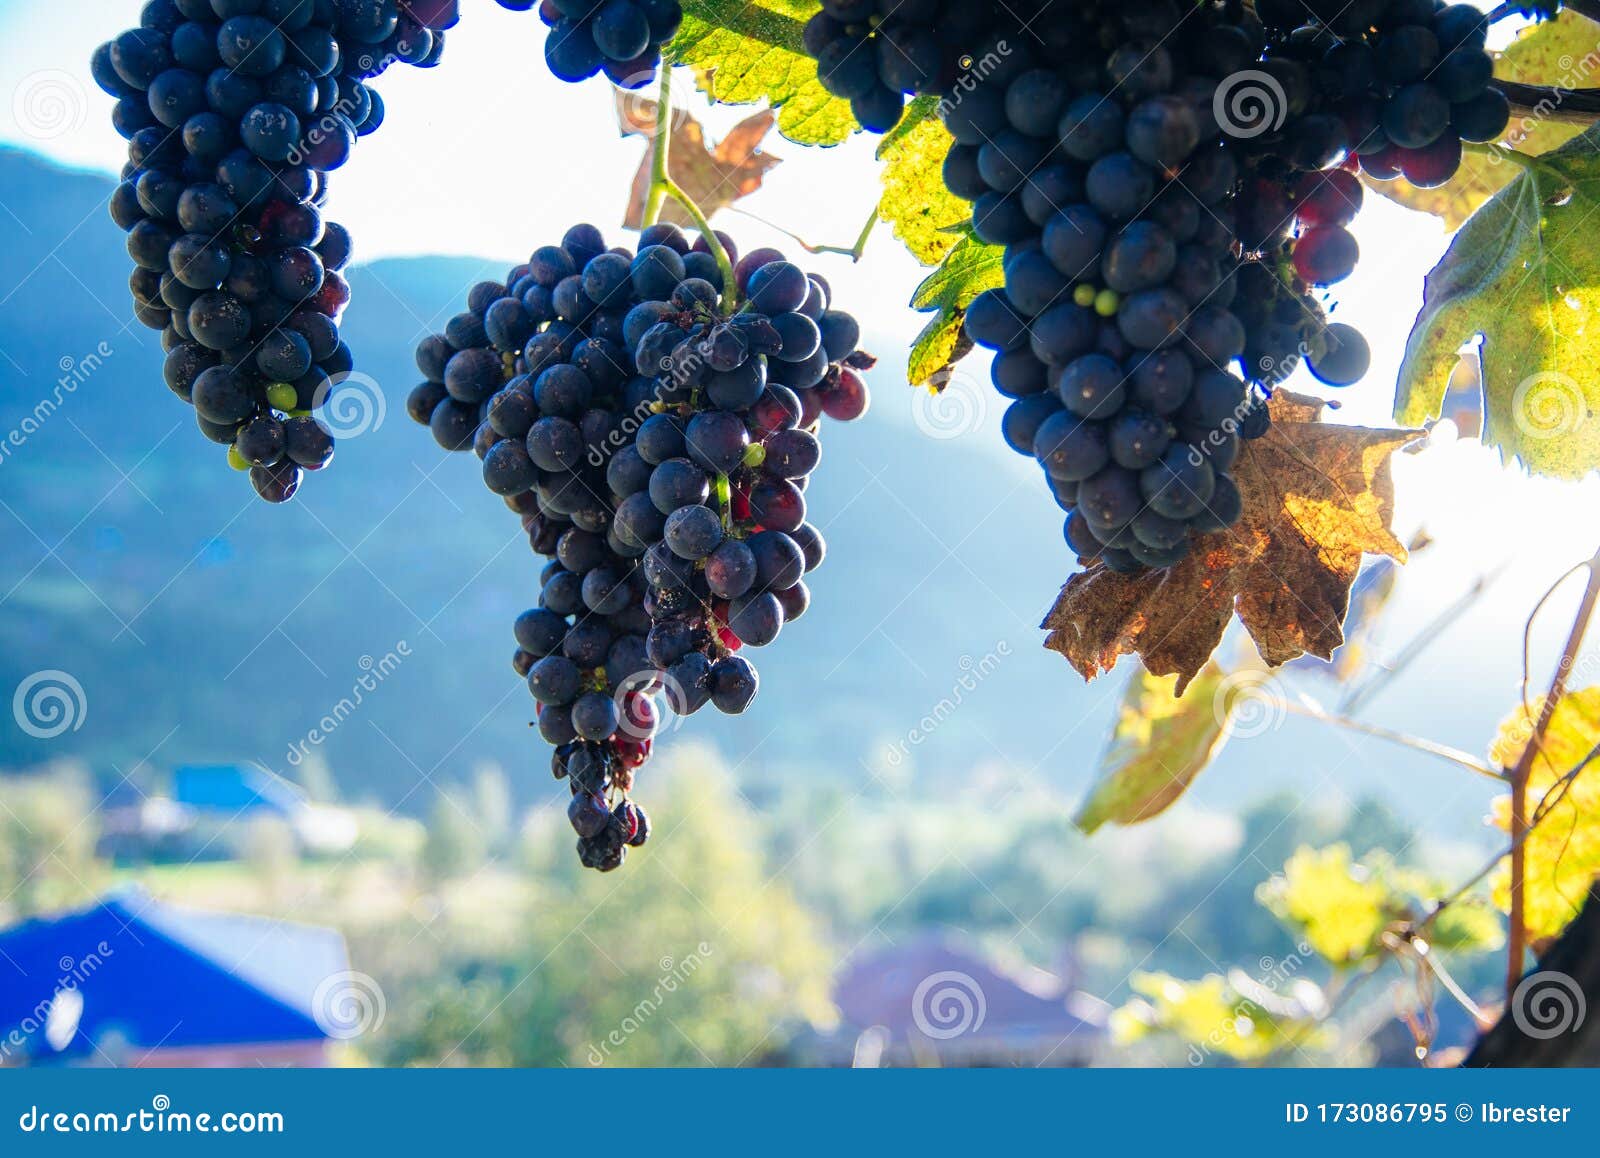 blue grapes at sunset in autumn vineyard